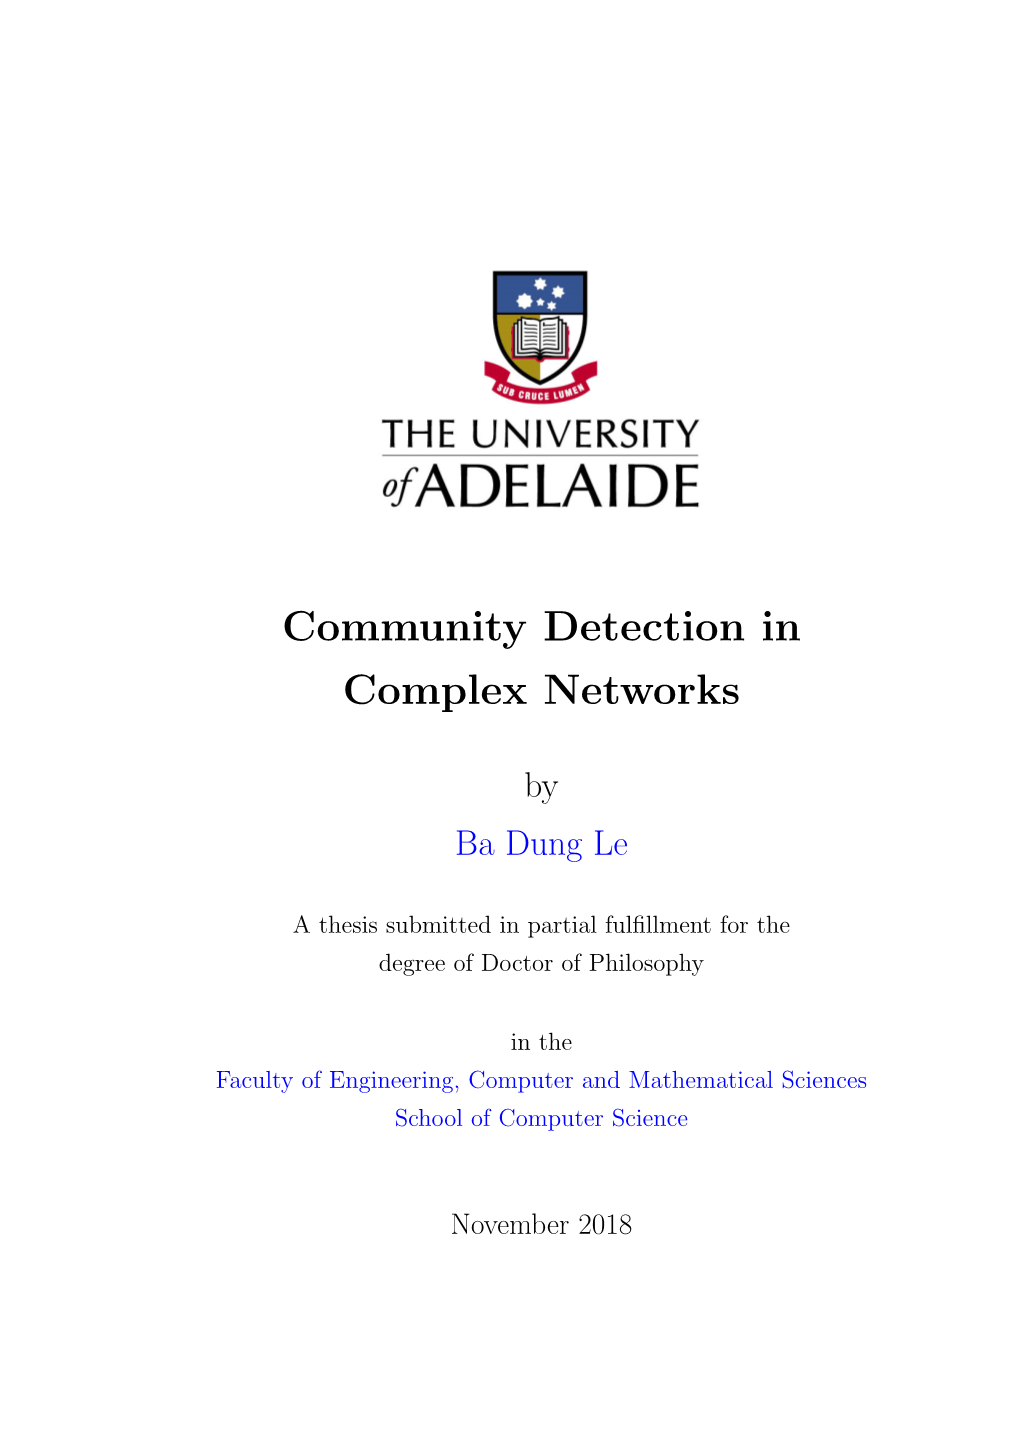 Community Detection in Complex Networks